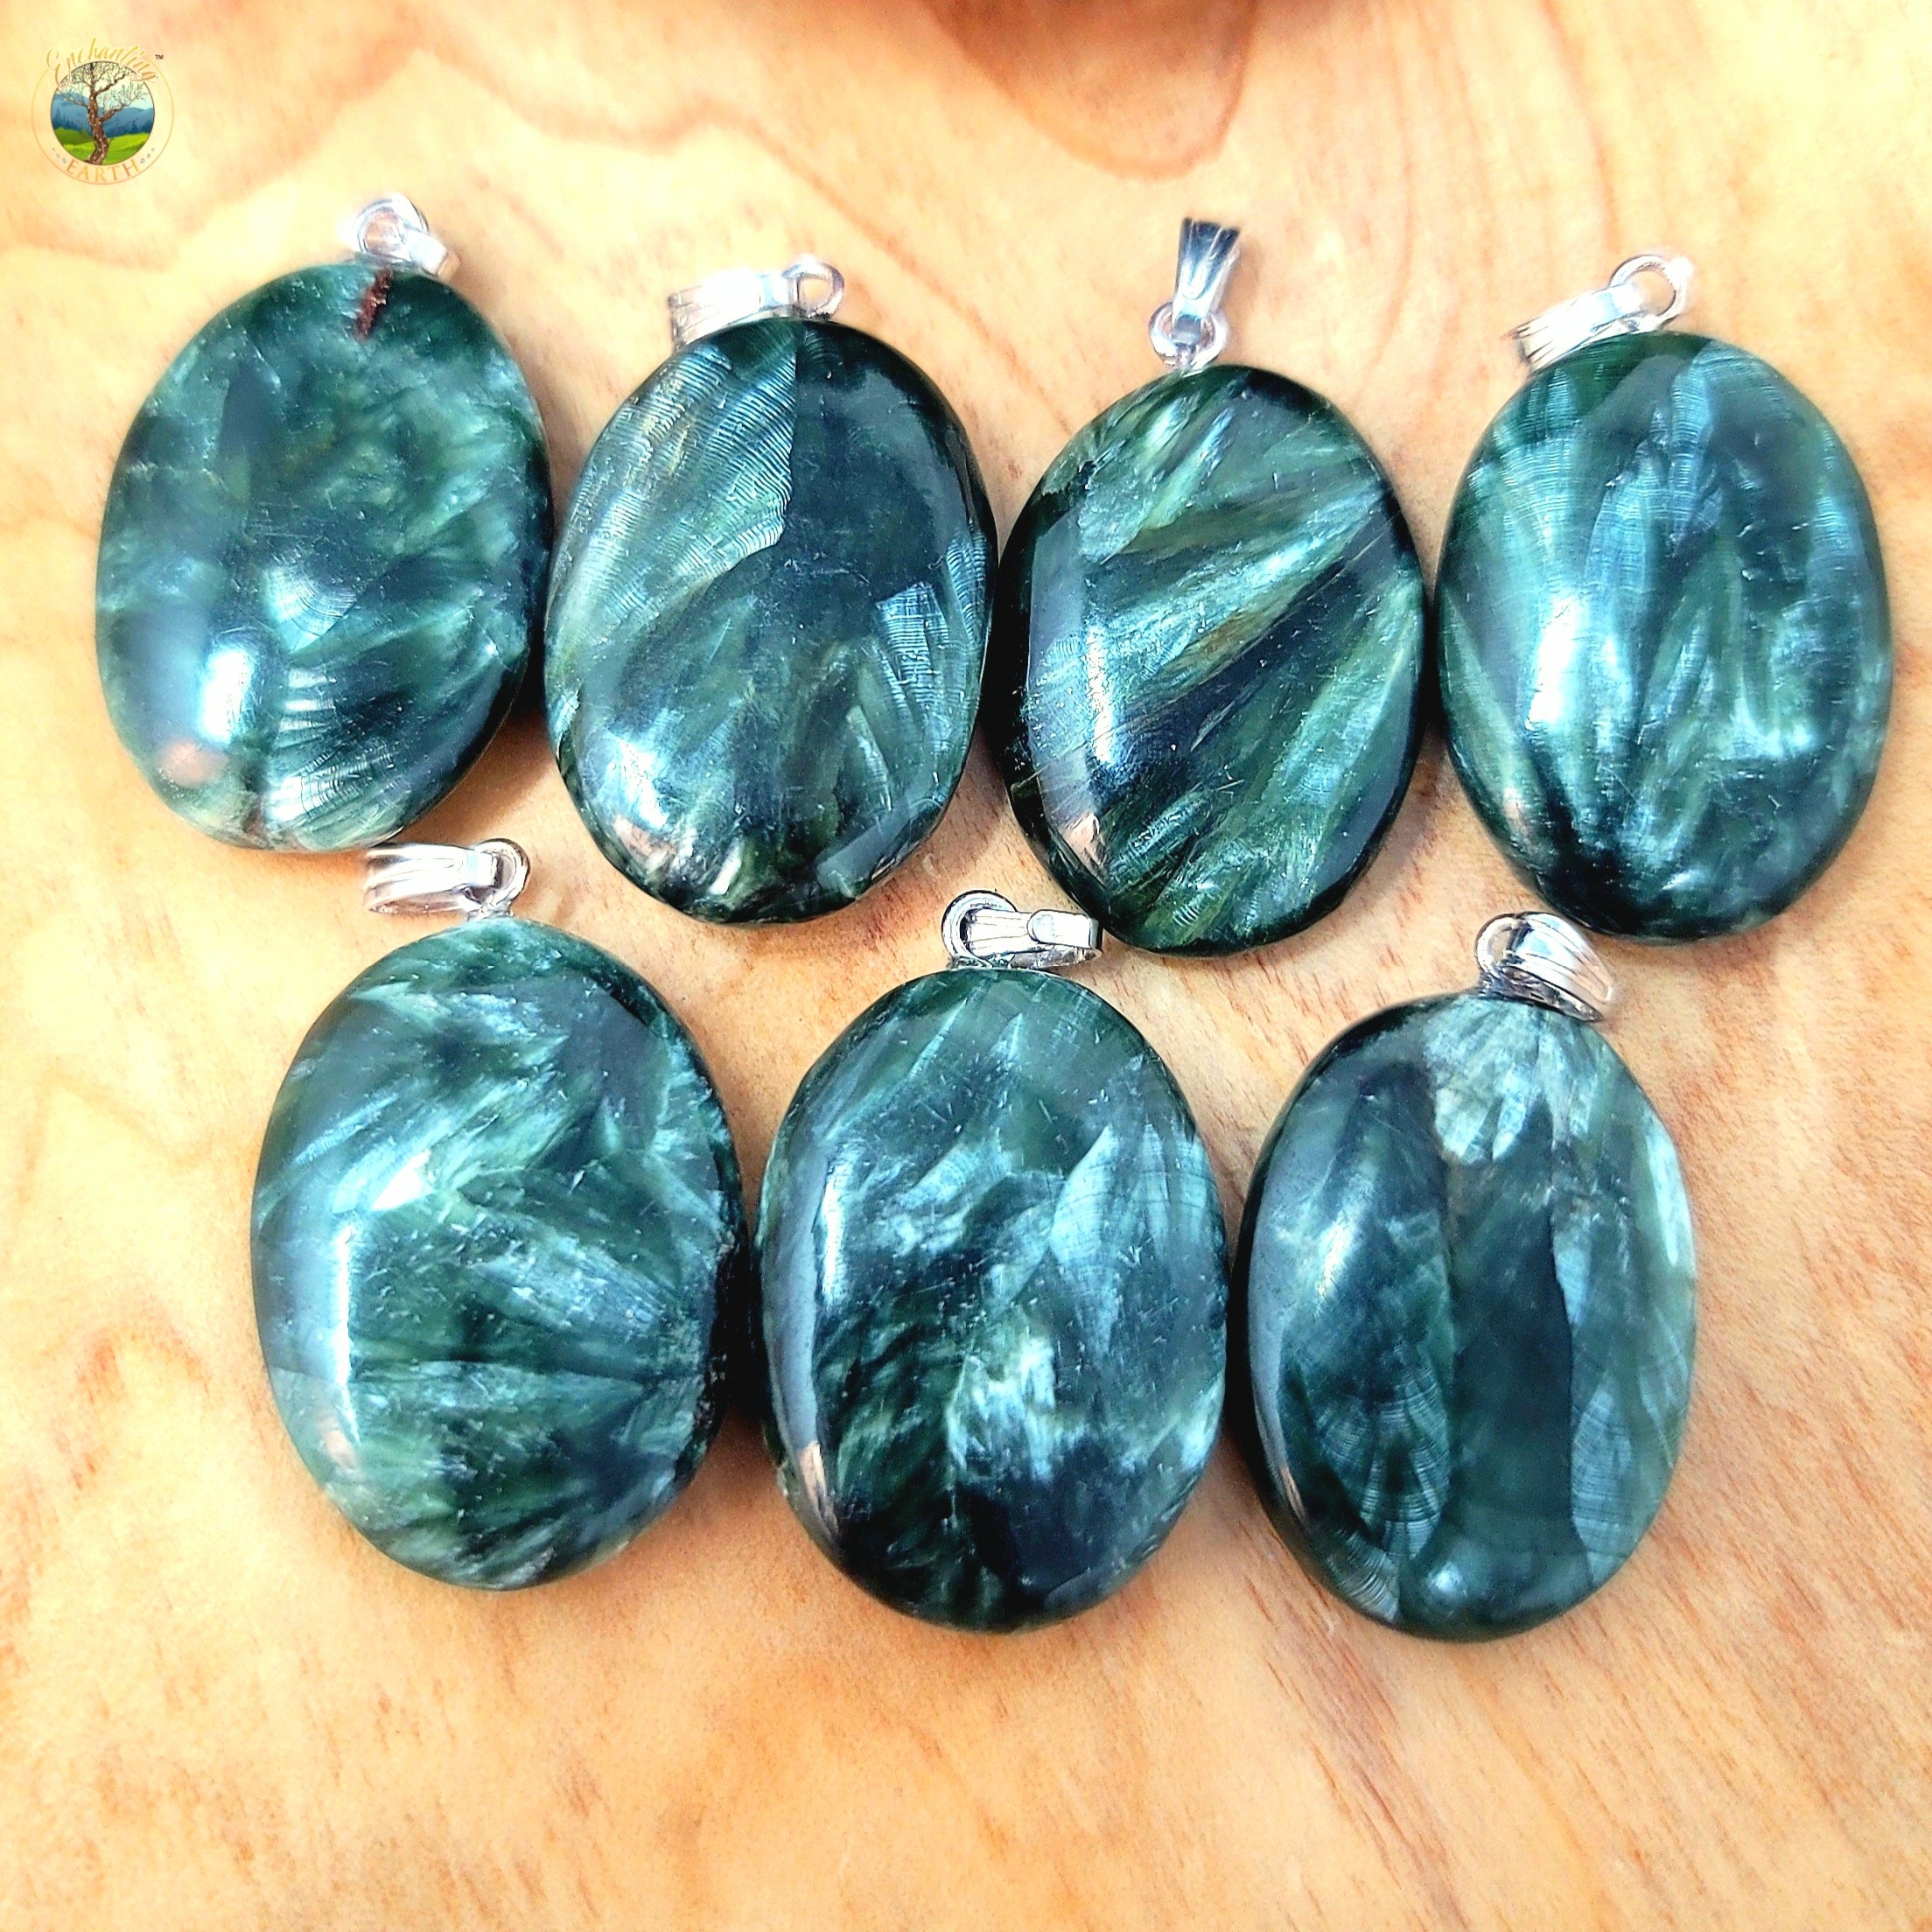 Seraphinite Pendant for Cellular Regeneration, Meditation and Overall Health